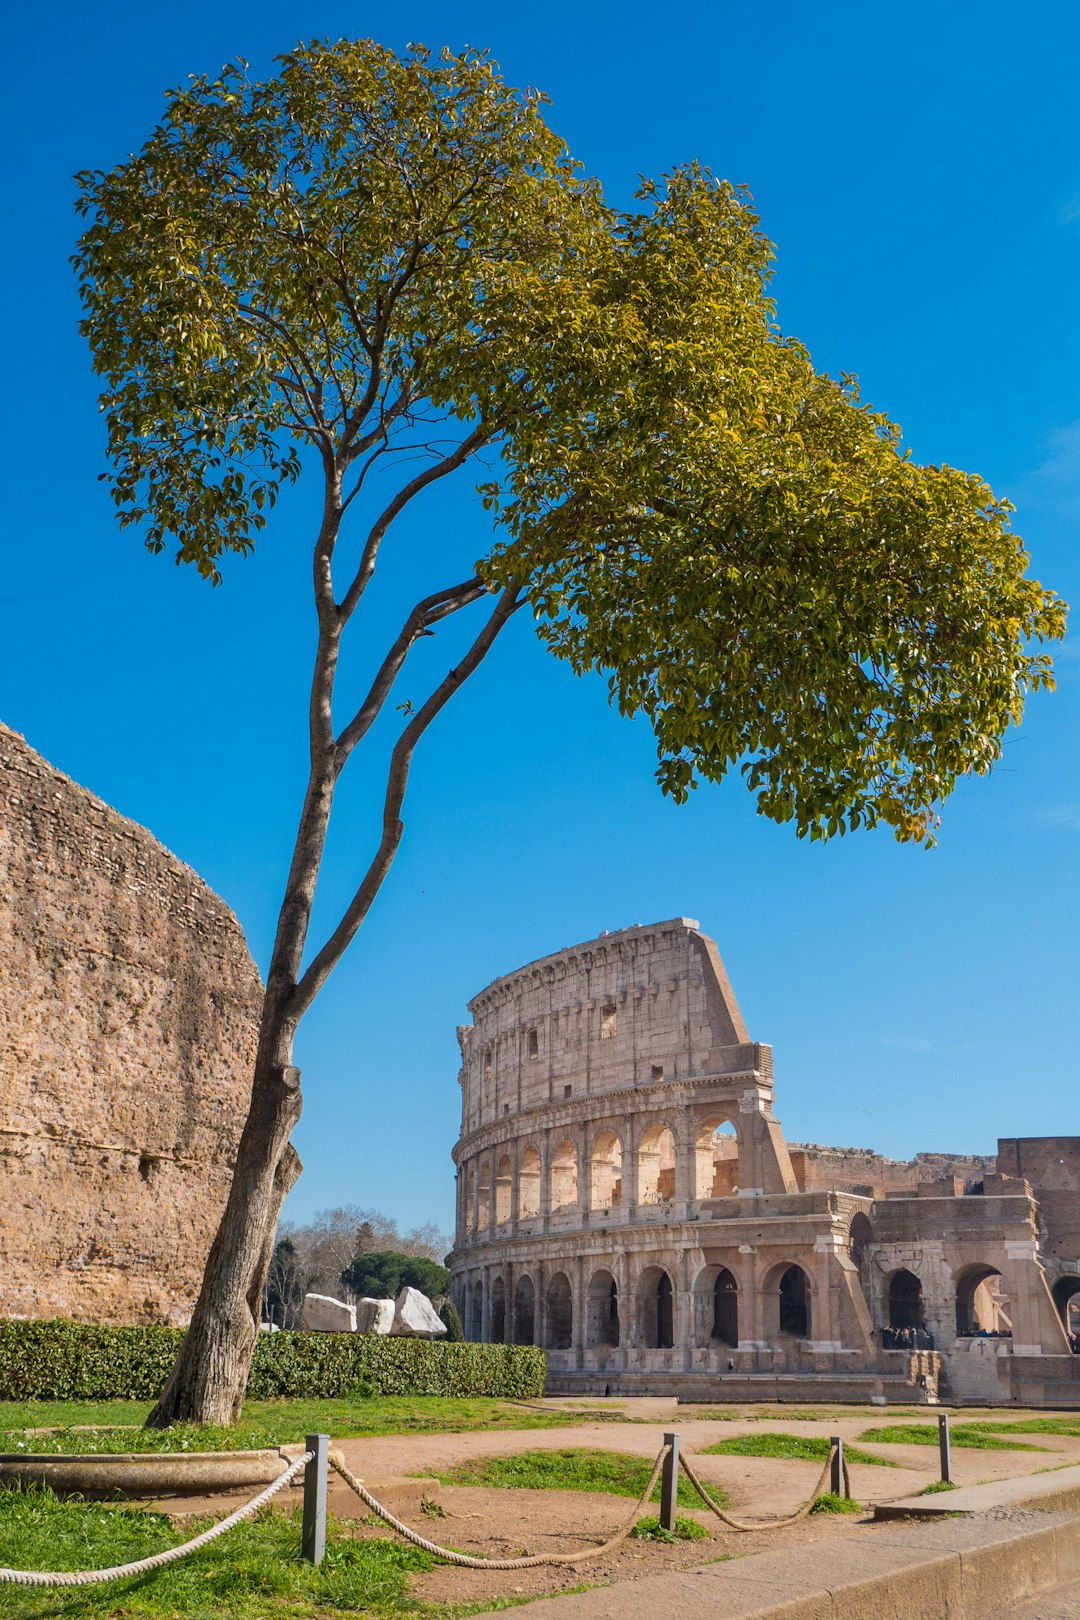 travelers stories about Landmark in Colosseum, Italy